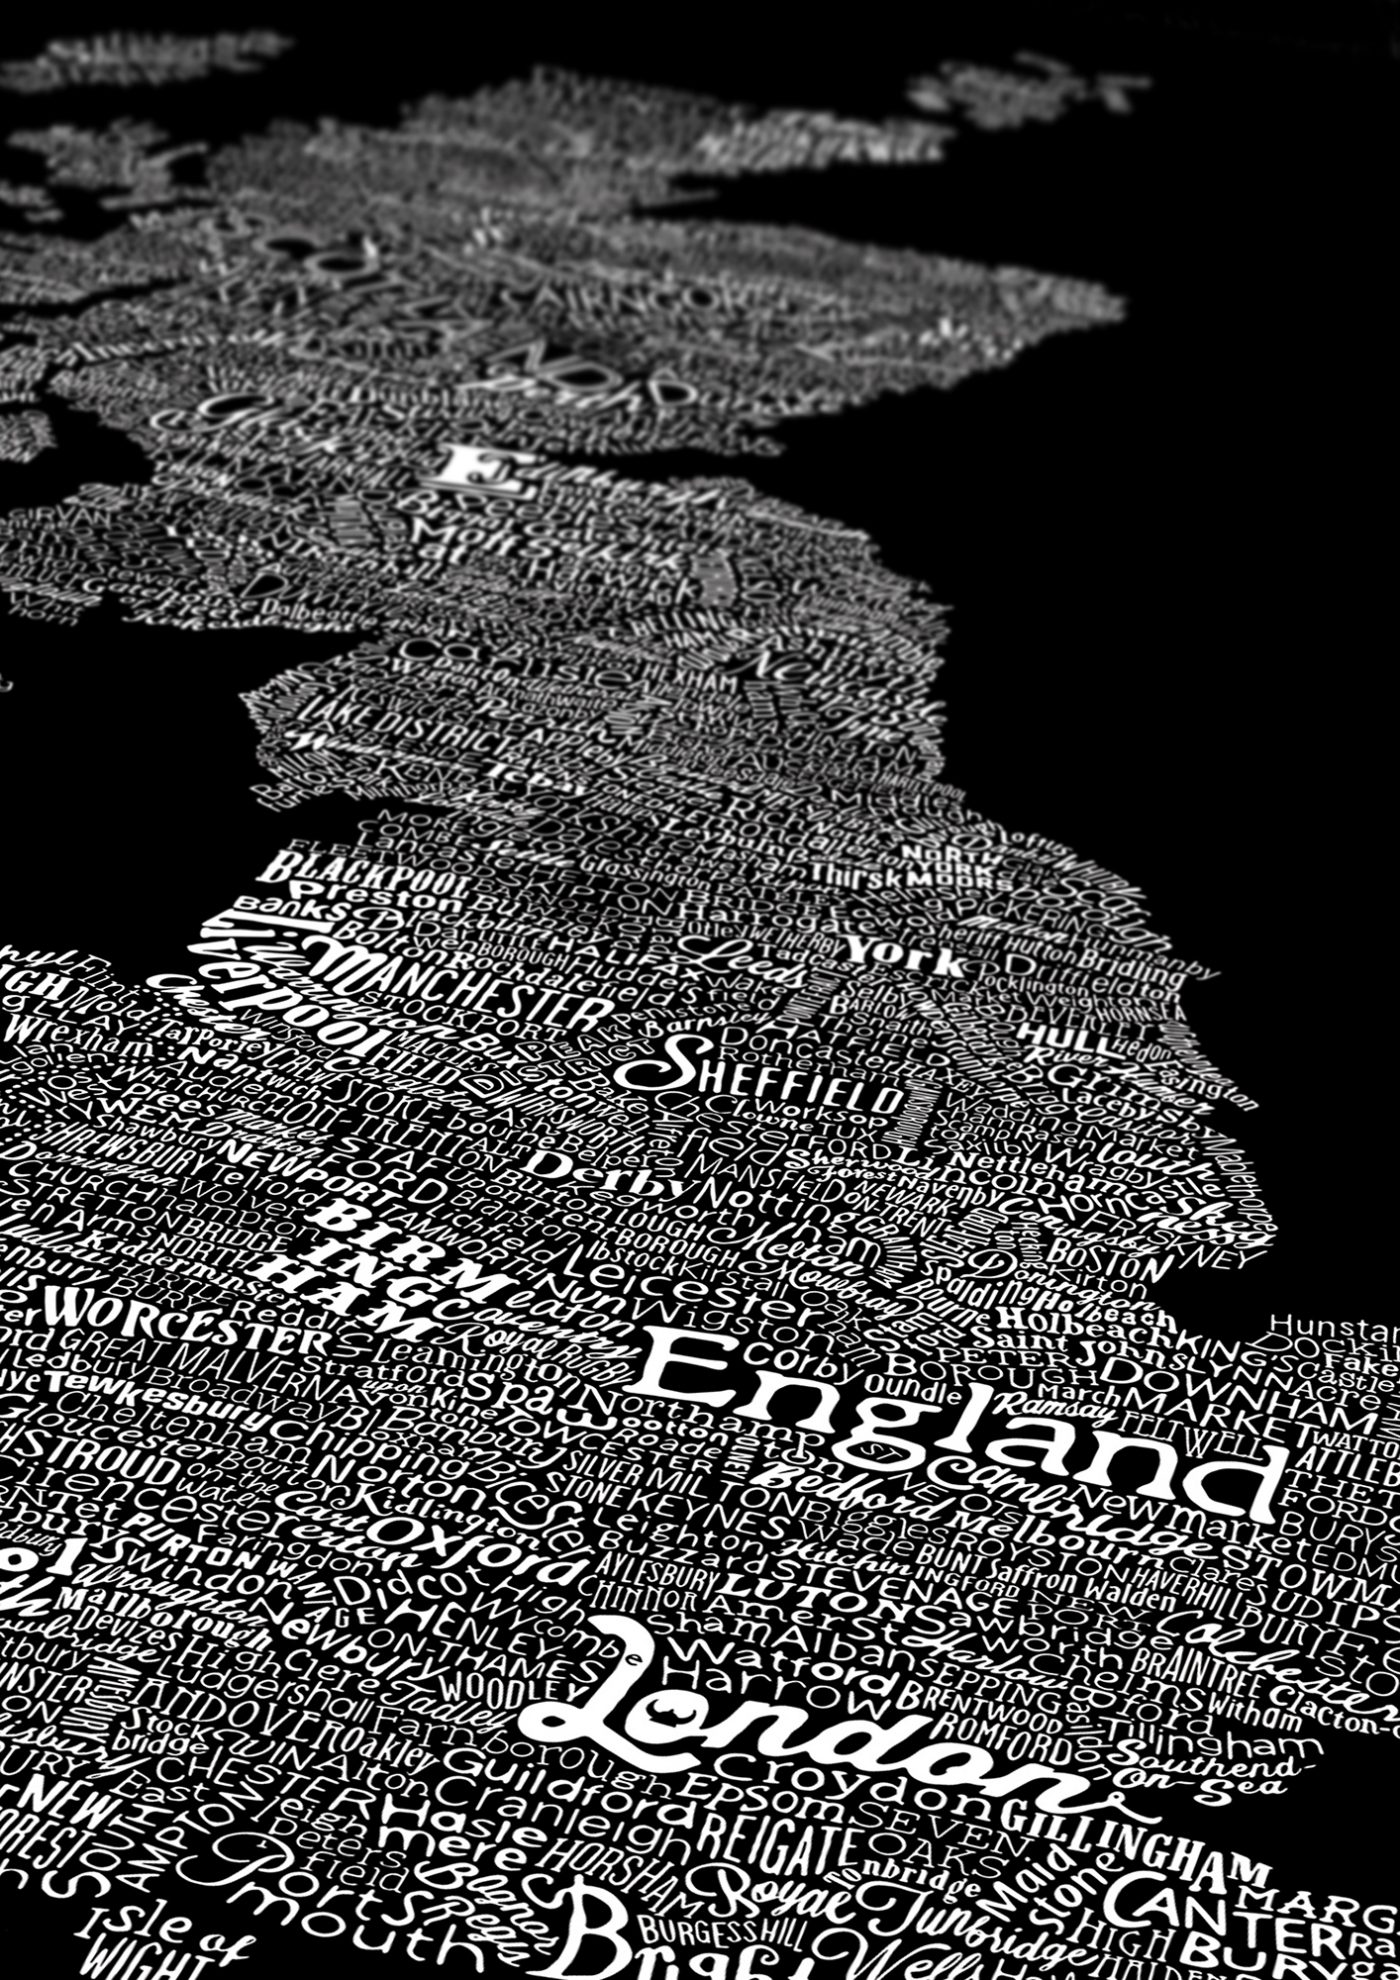 type map of england